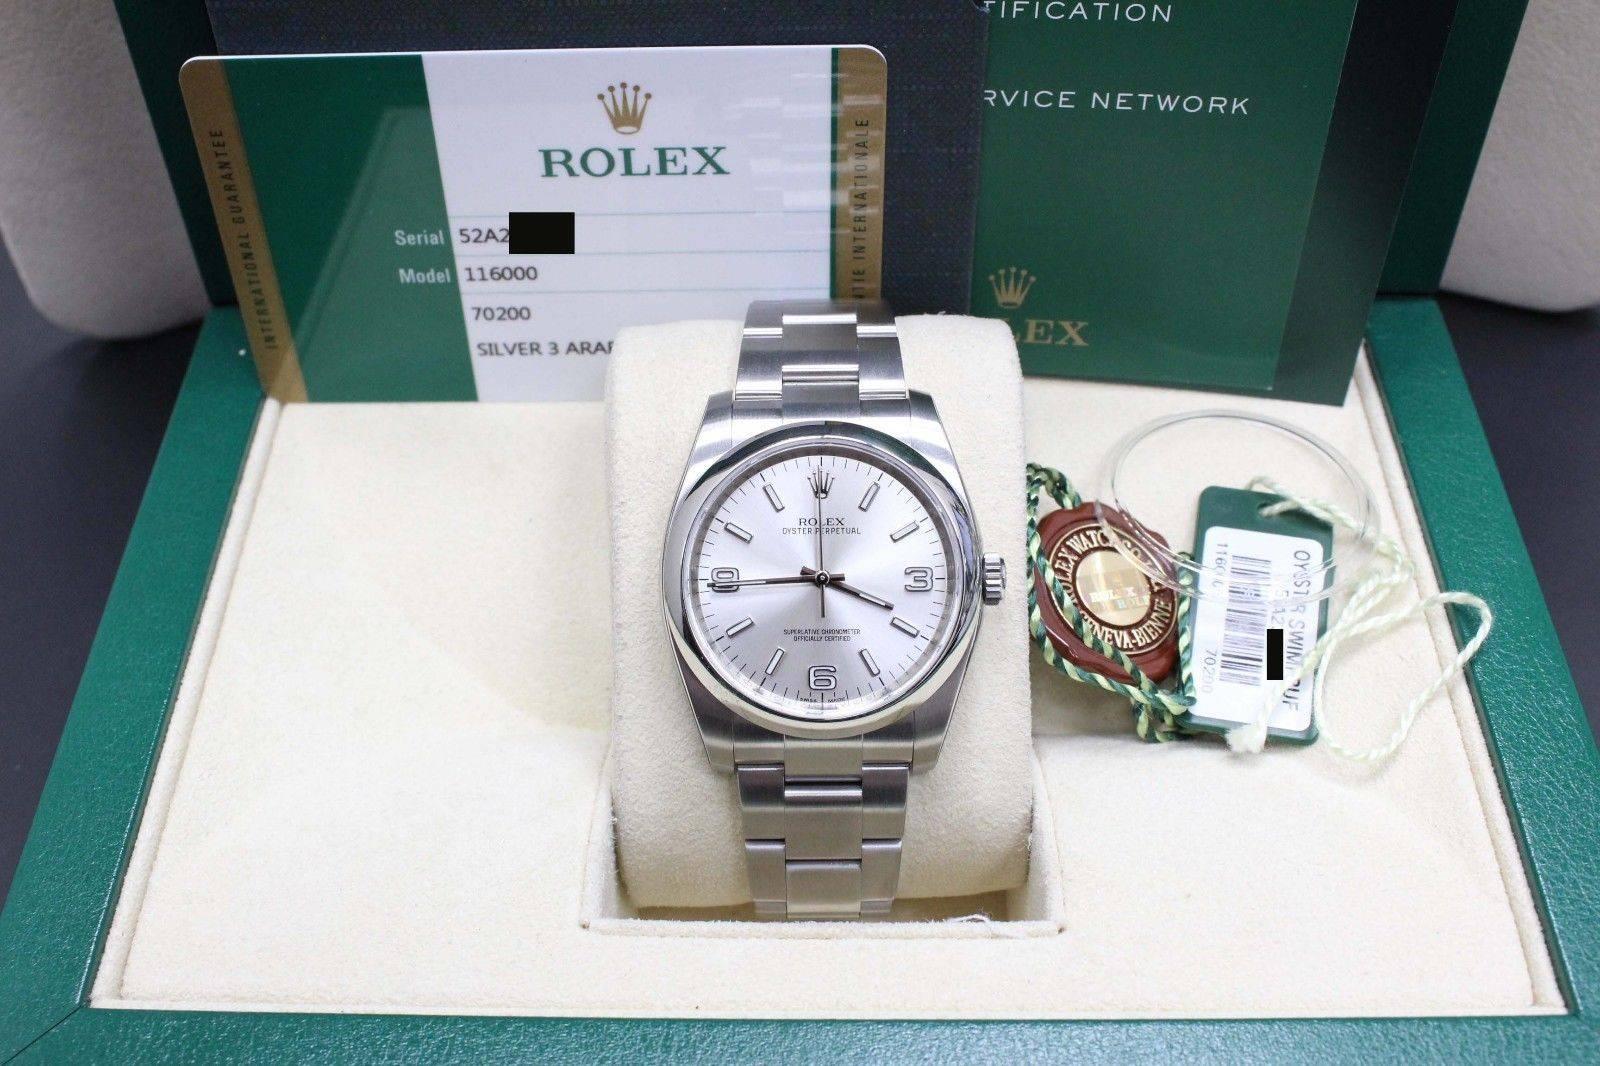 Style Number: 116000
Serial: 52A23***
Year: 2015
Model: Oyster Perpetual 
Case Material: Stainless Steel
Band: Stainless Steel
Bezel: Stainless Steel
Dial: Silver
Face: Sapphire Crystal
Case Size: 36mm
Includes: 
-Rolex Box & Papers
-Certified